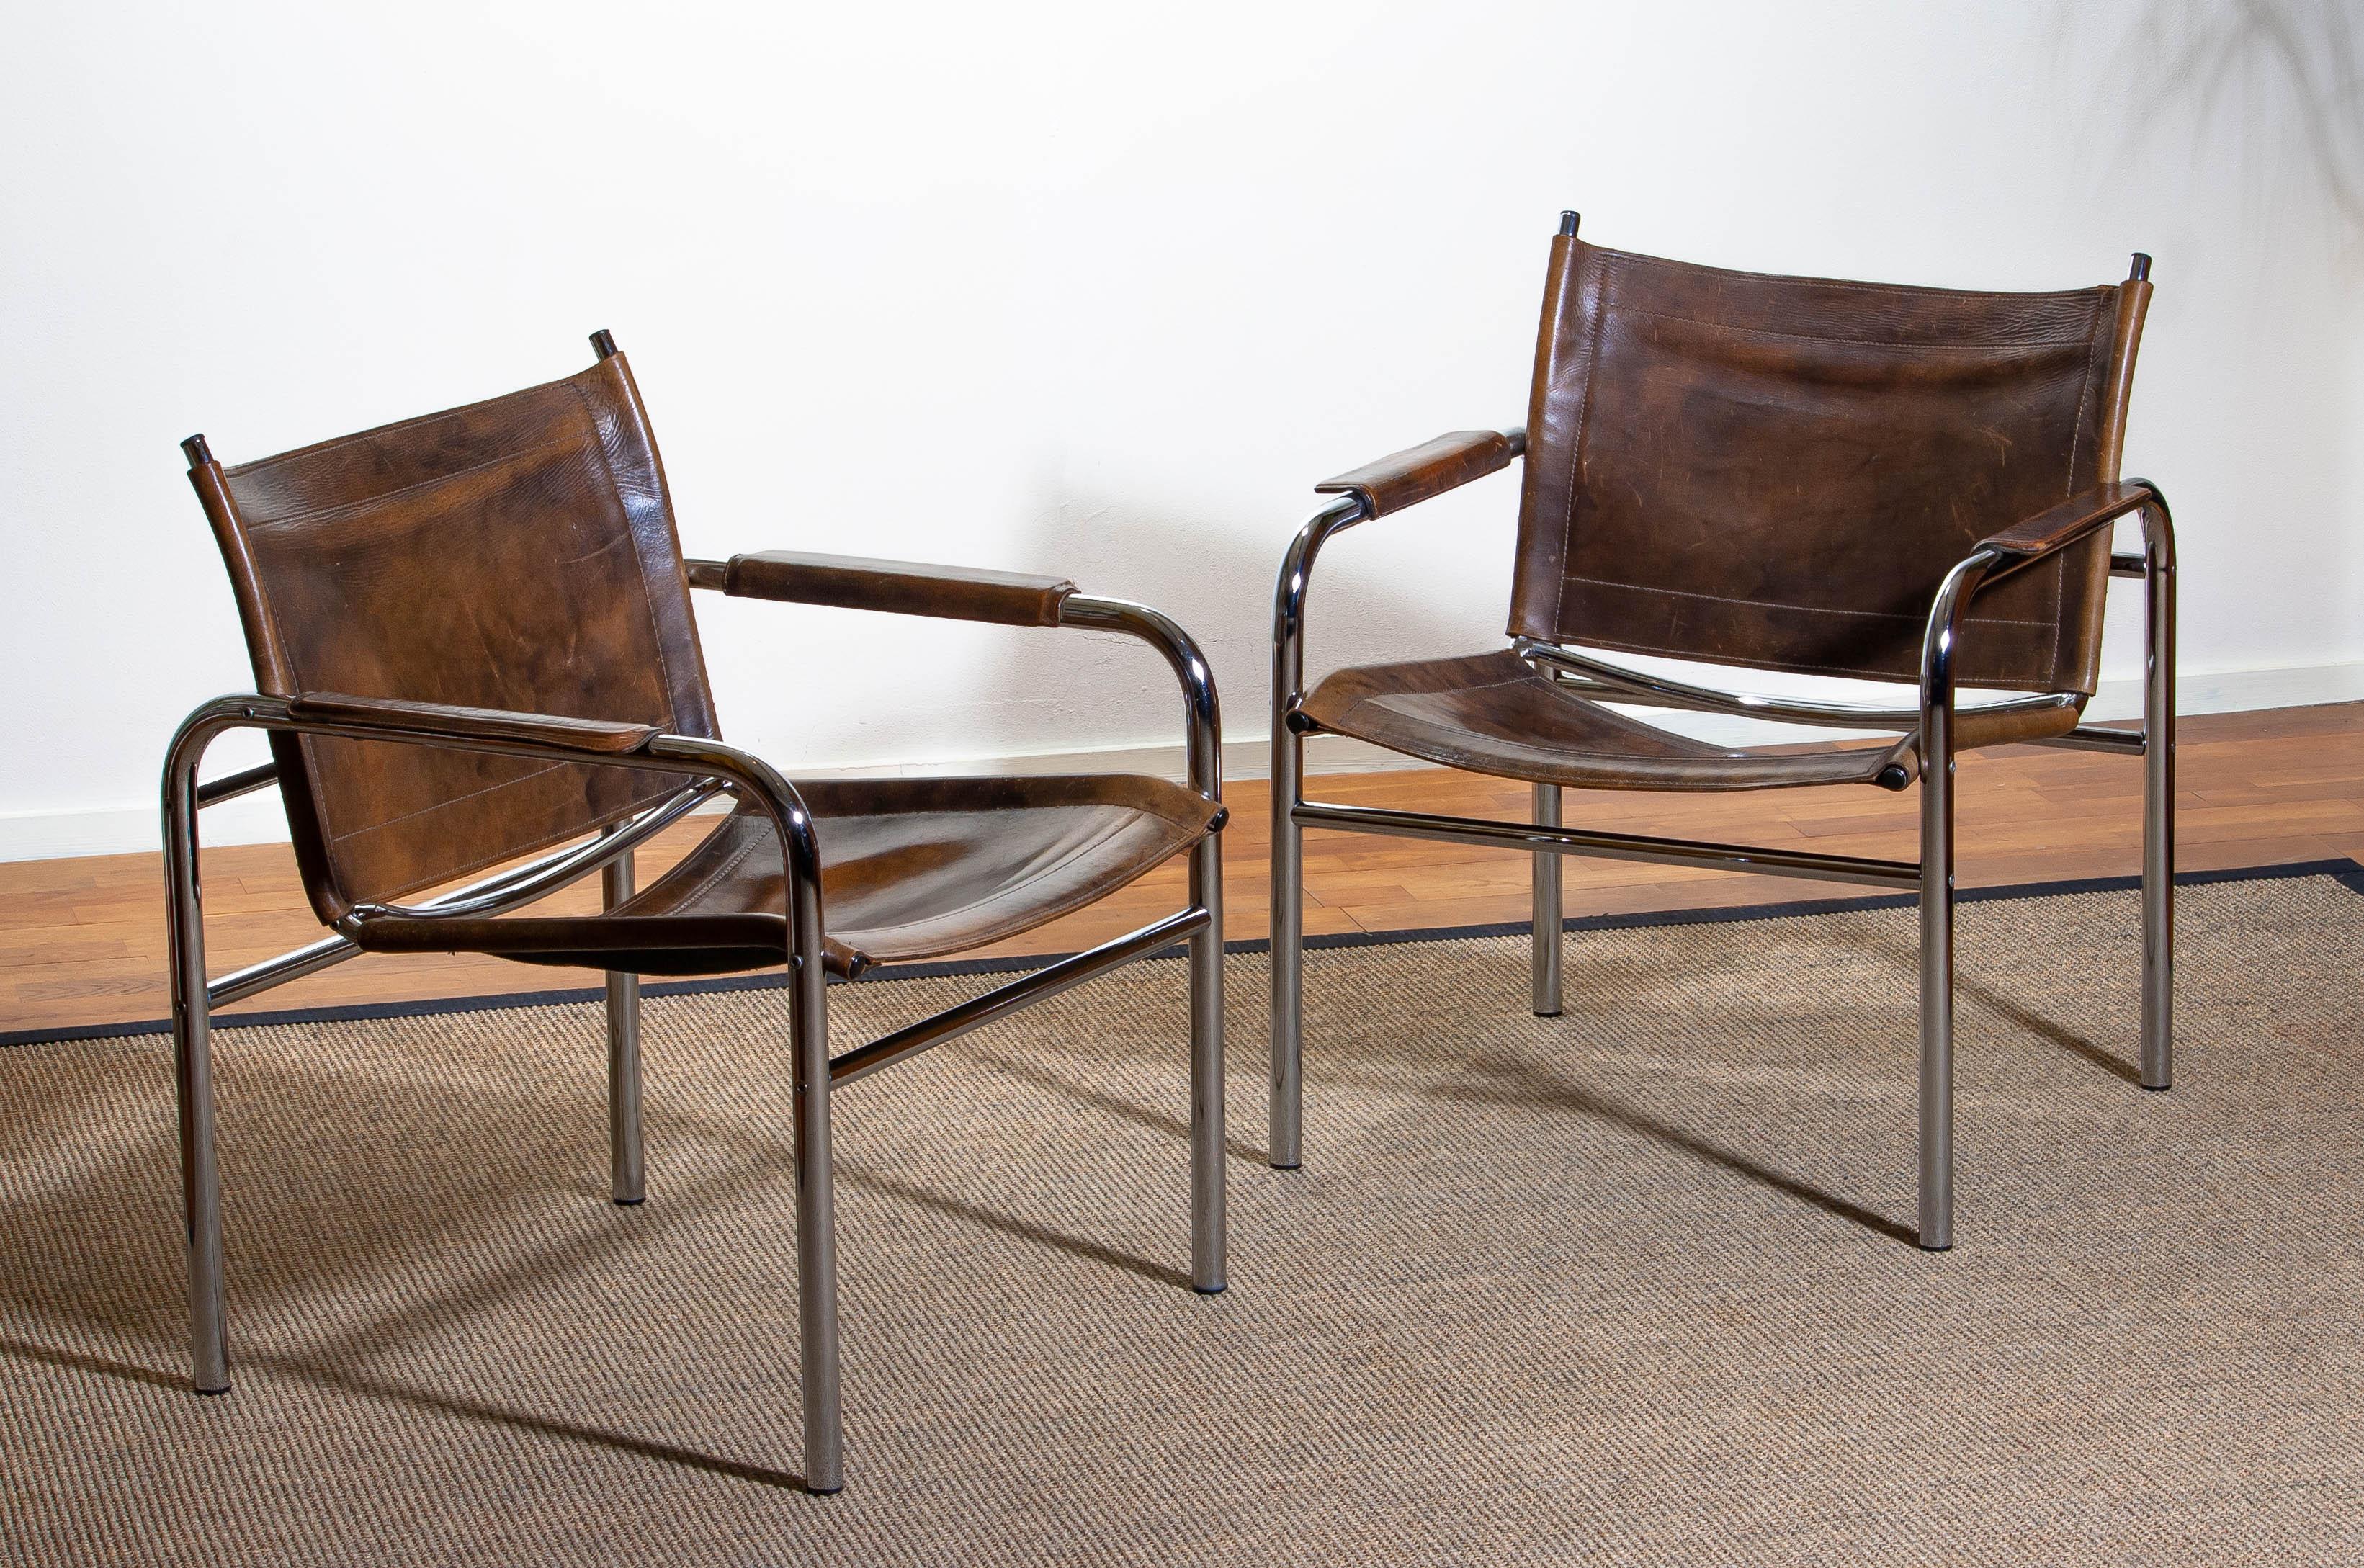 Scandinavian Modern 1980s, Pair of Leather and Tubular Steel Armchairs by Tord Bjorklund, Sweden